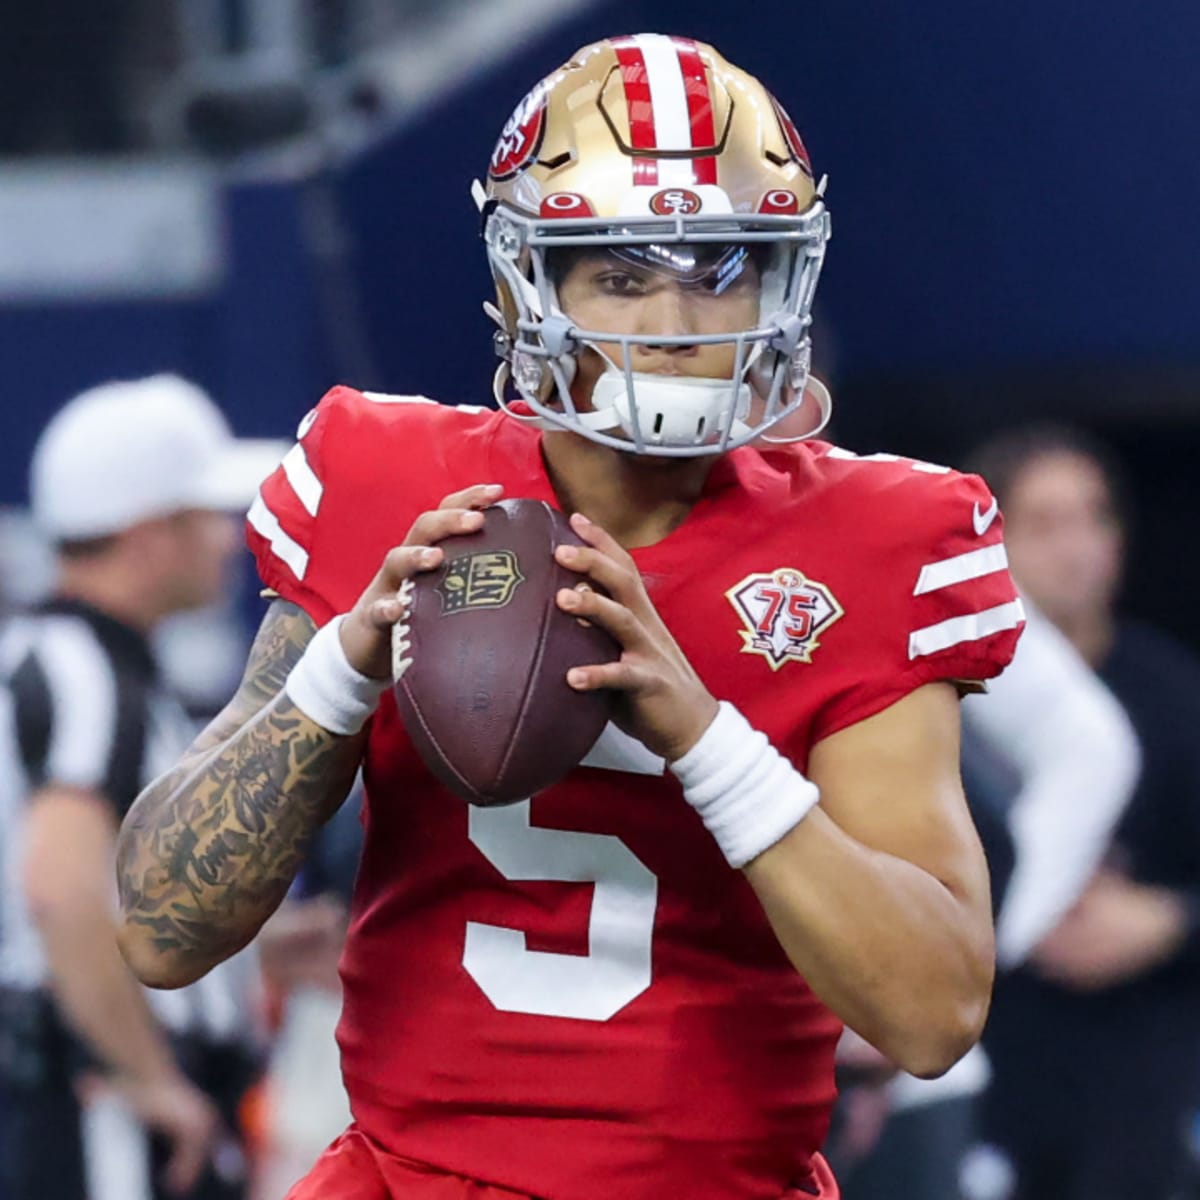 Padecky: Pressure on Trey Lance to quickly become 49ers' next